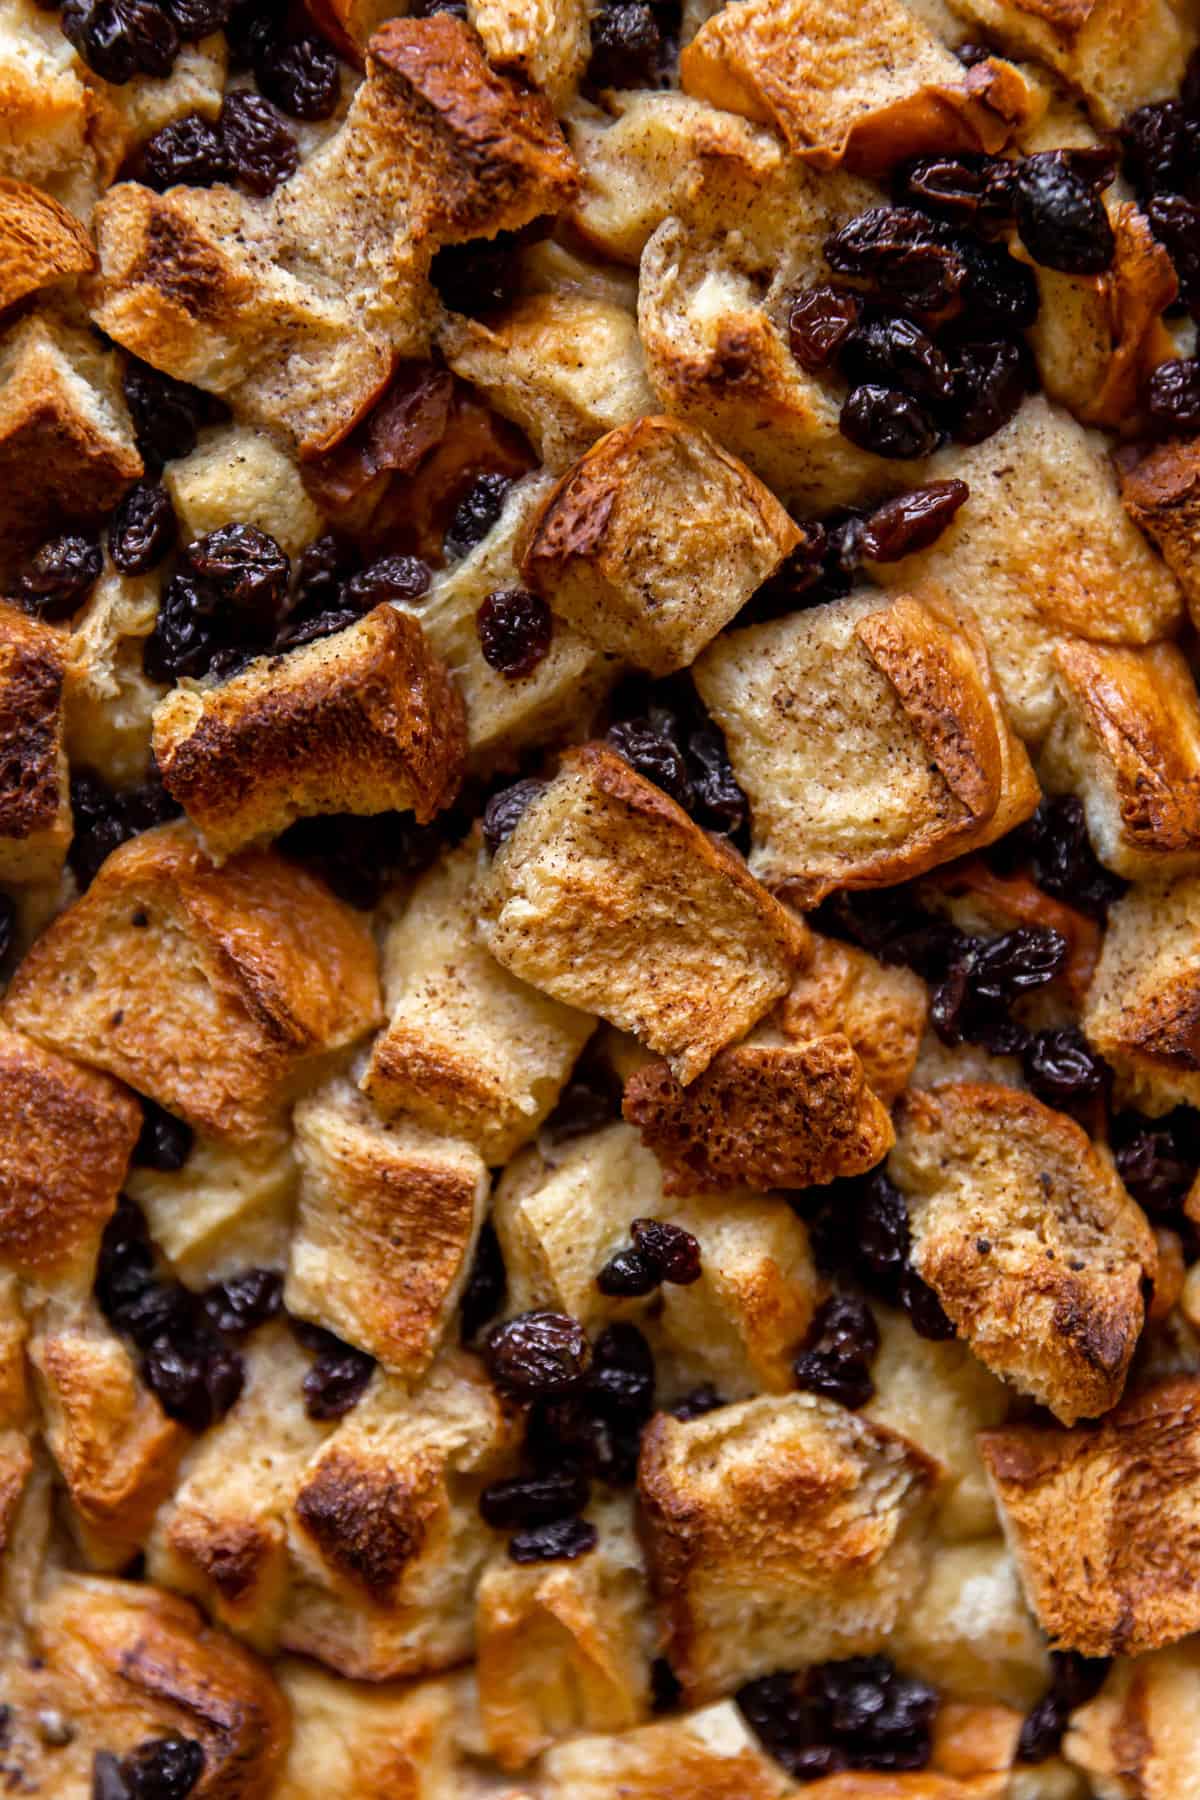 Up close baked bread pudding.